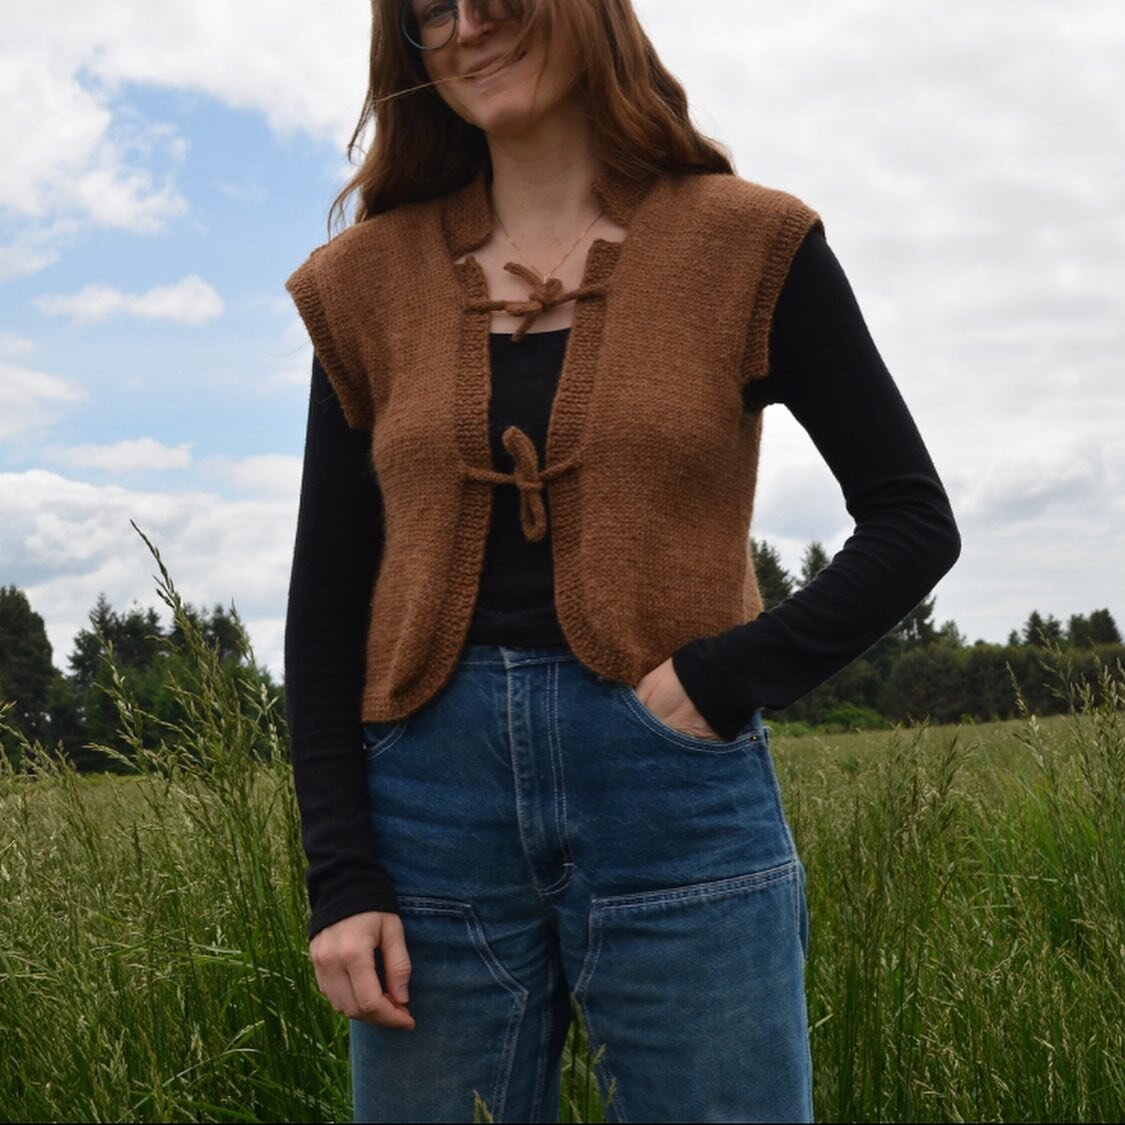 The Better Vest - pattern now available on Ravelry &amp; our website ☕️
.
A boxy layering vest with a notched collar and curved hem. Full shoulders &amp; i cord ties. Great with casual wear or over a dress .. wear on top of a sweater or a tank! Inclu